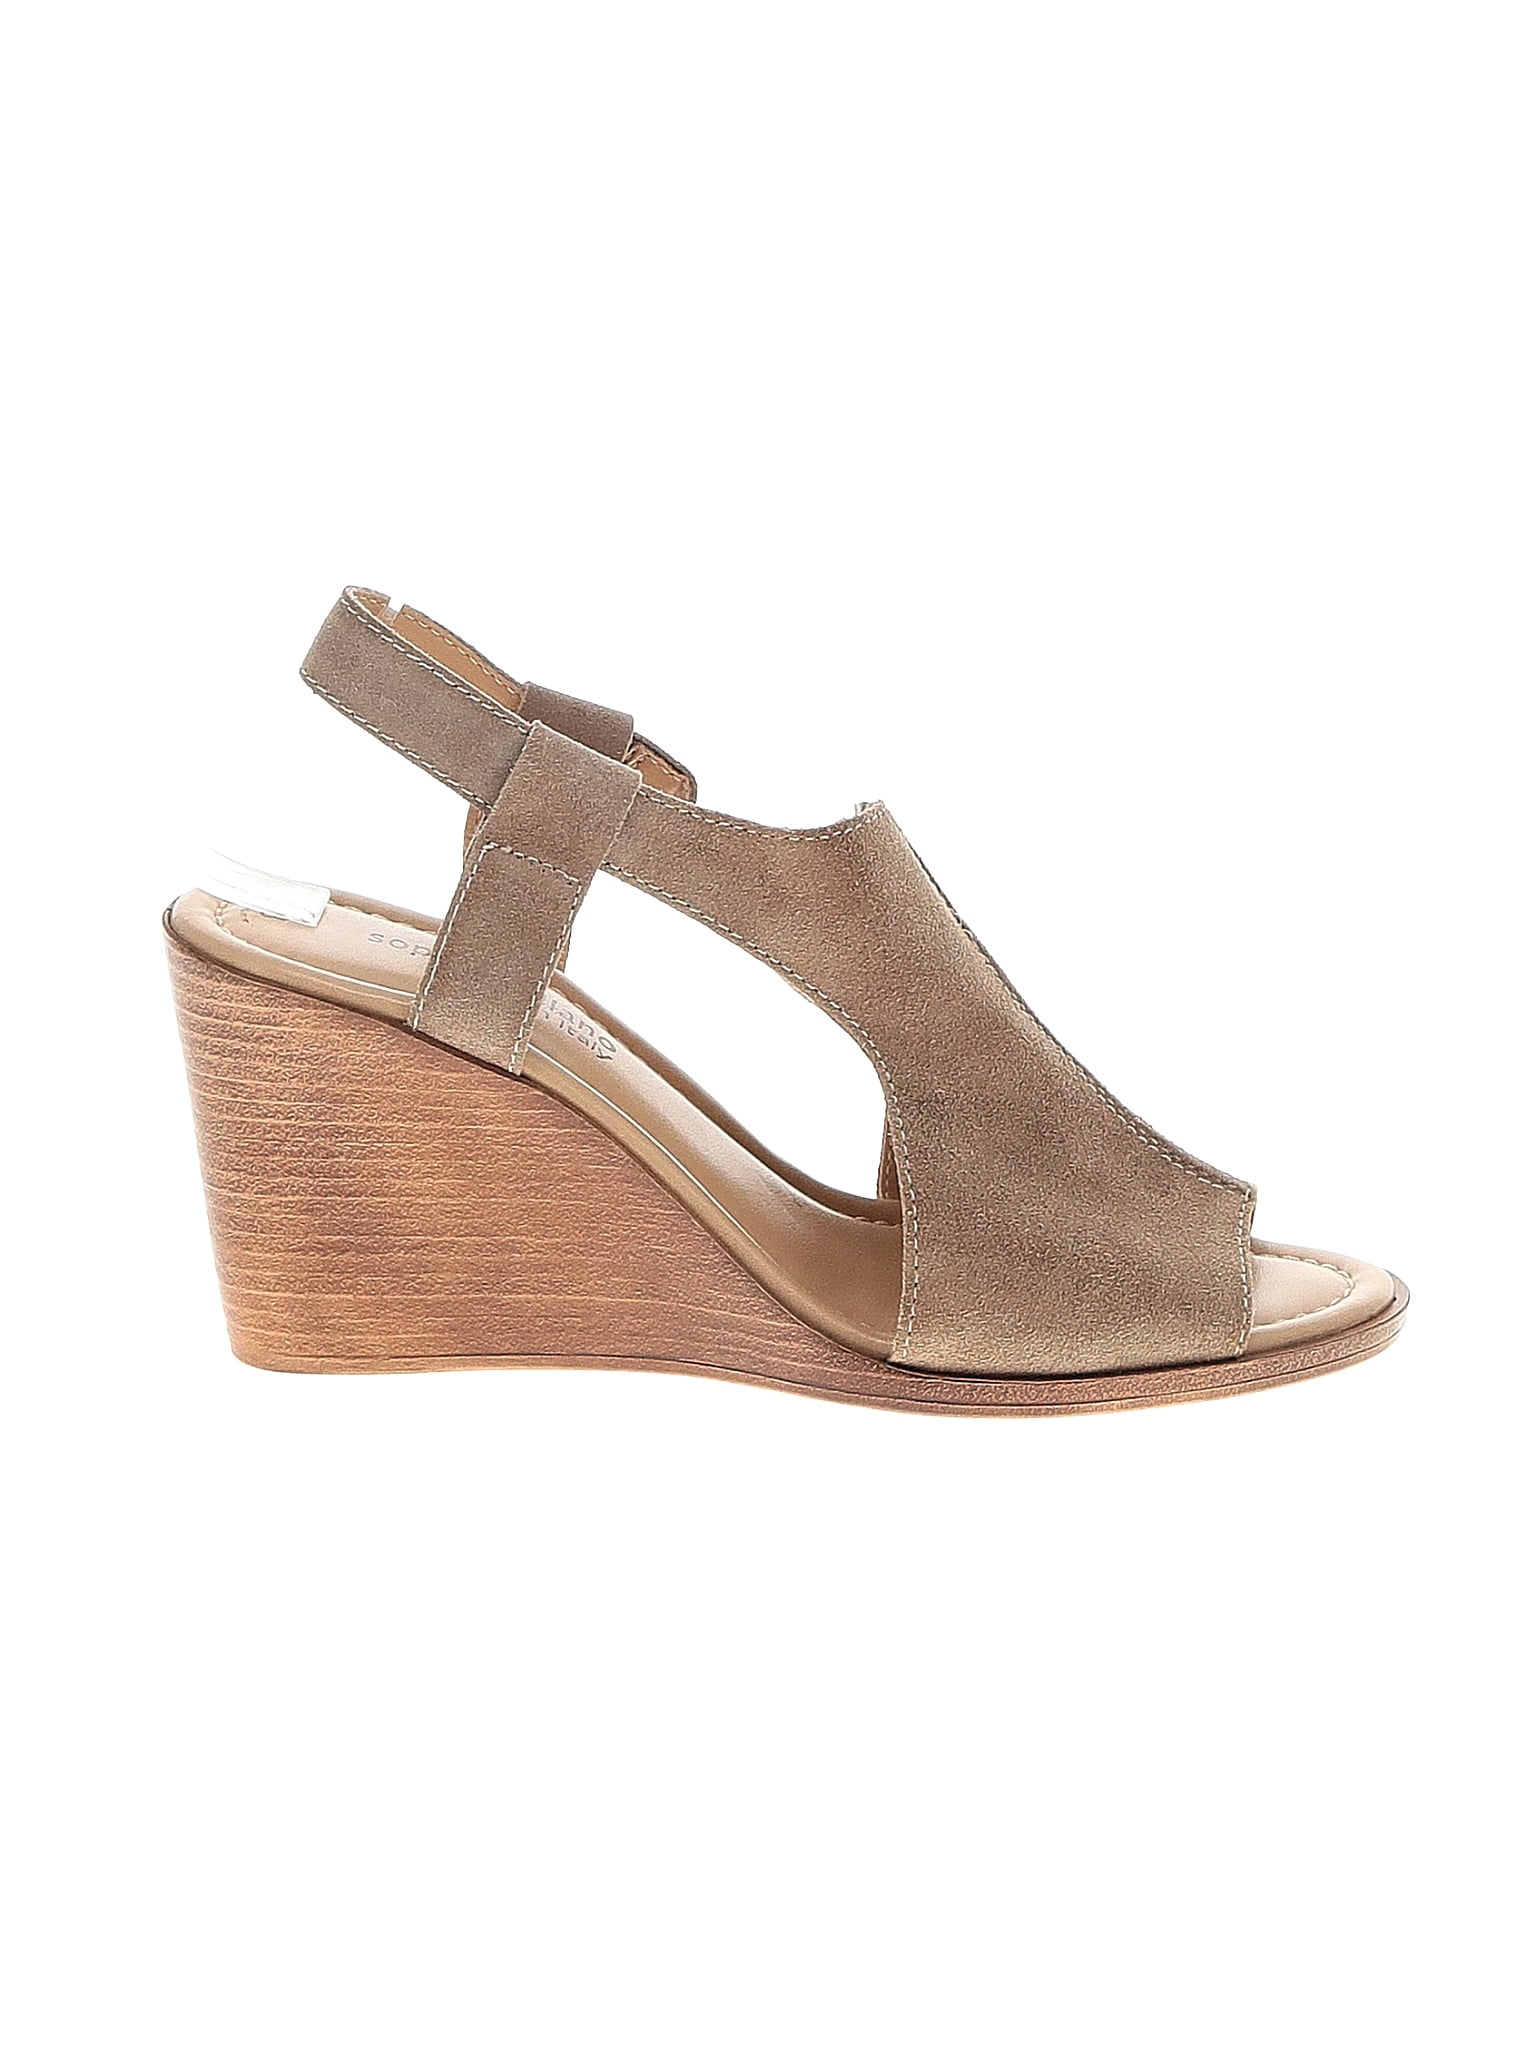 Sophia Milano Women's Shoes On Sale Up To 90% Off Retail